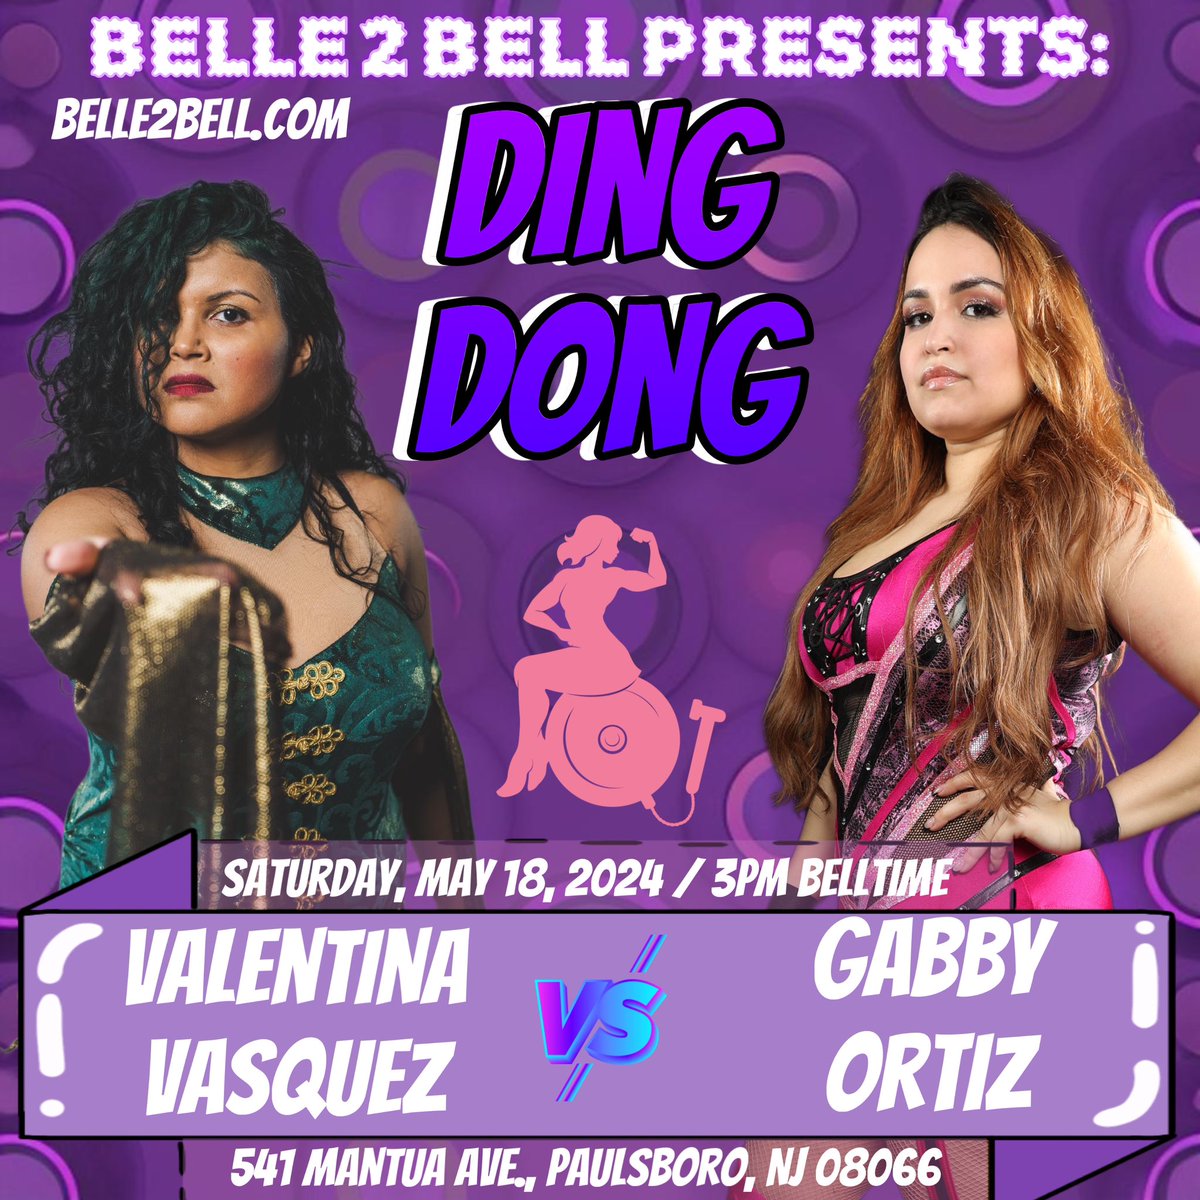 Valentina Vasquez steps up on May 18th to take on Gabby Ortiz at Ding Dong! Tickets available at Belle2Bell.com! @Gabbity @Val_en_tina_